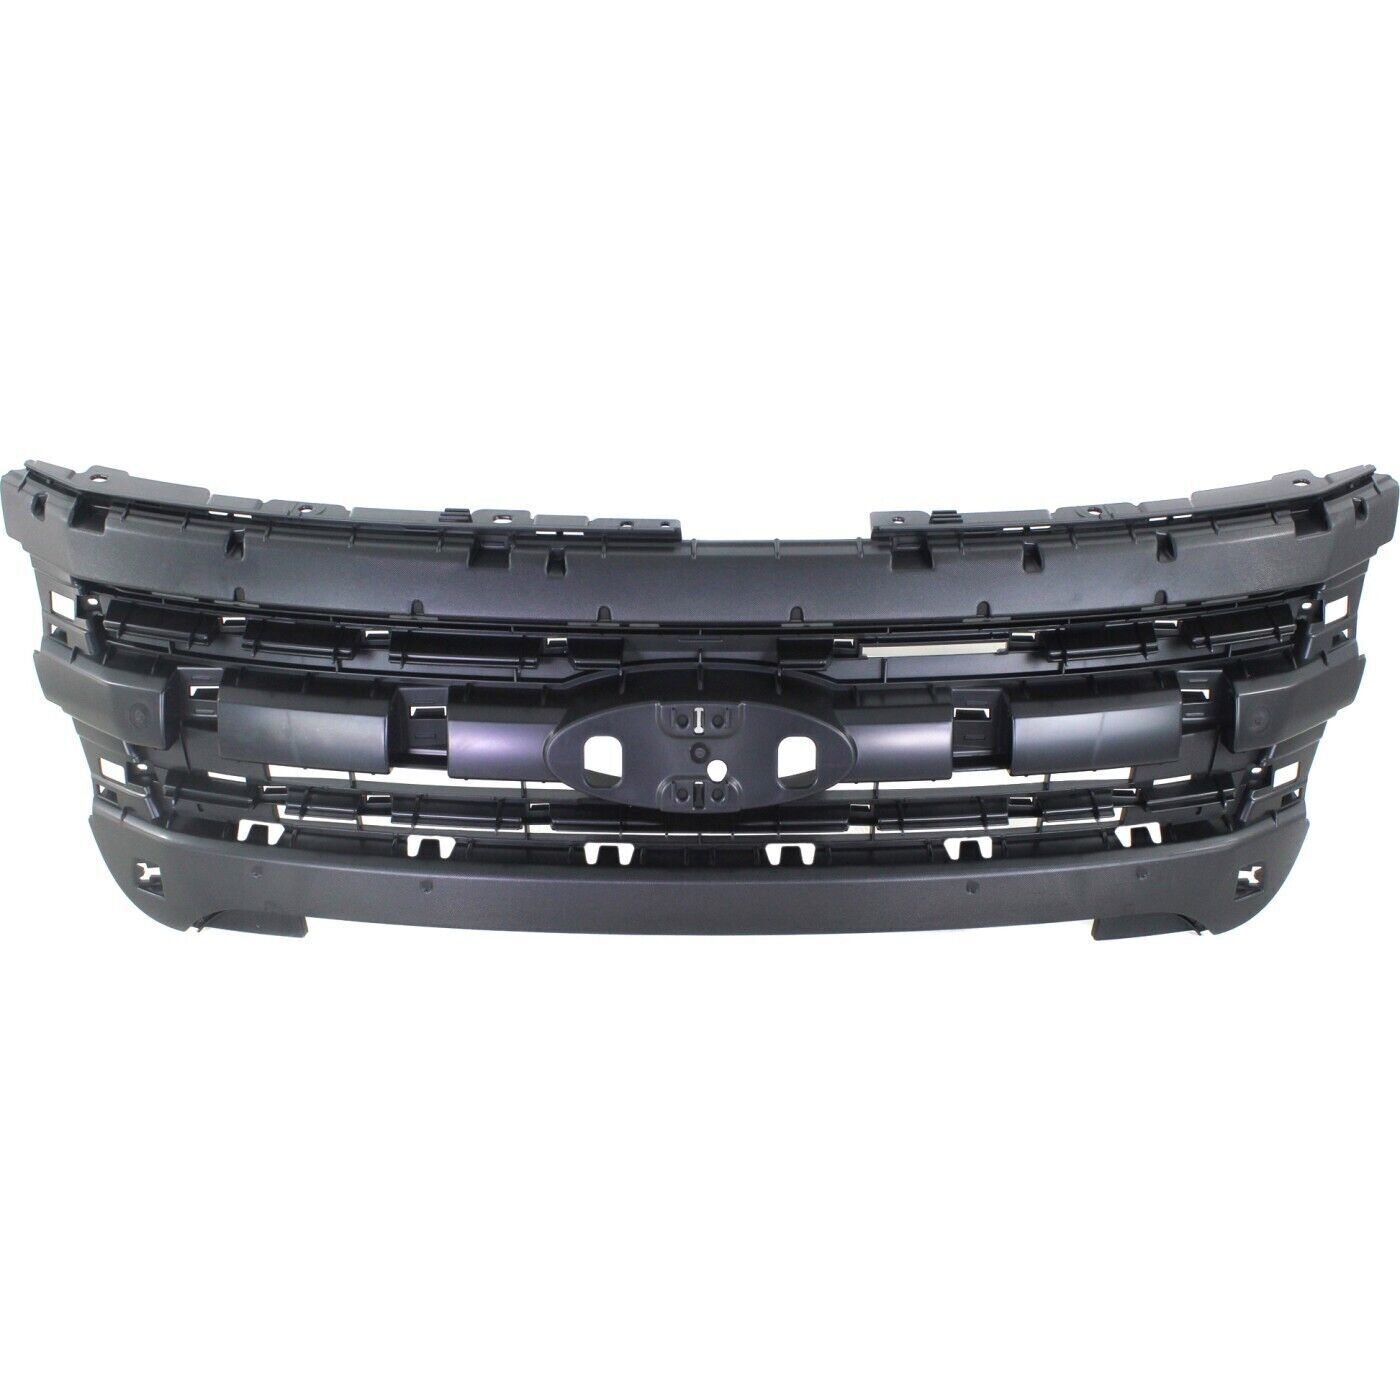 NEW Grille Mounting Panel For 2011-2015 Ford Explorer SHIPS TODAY